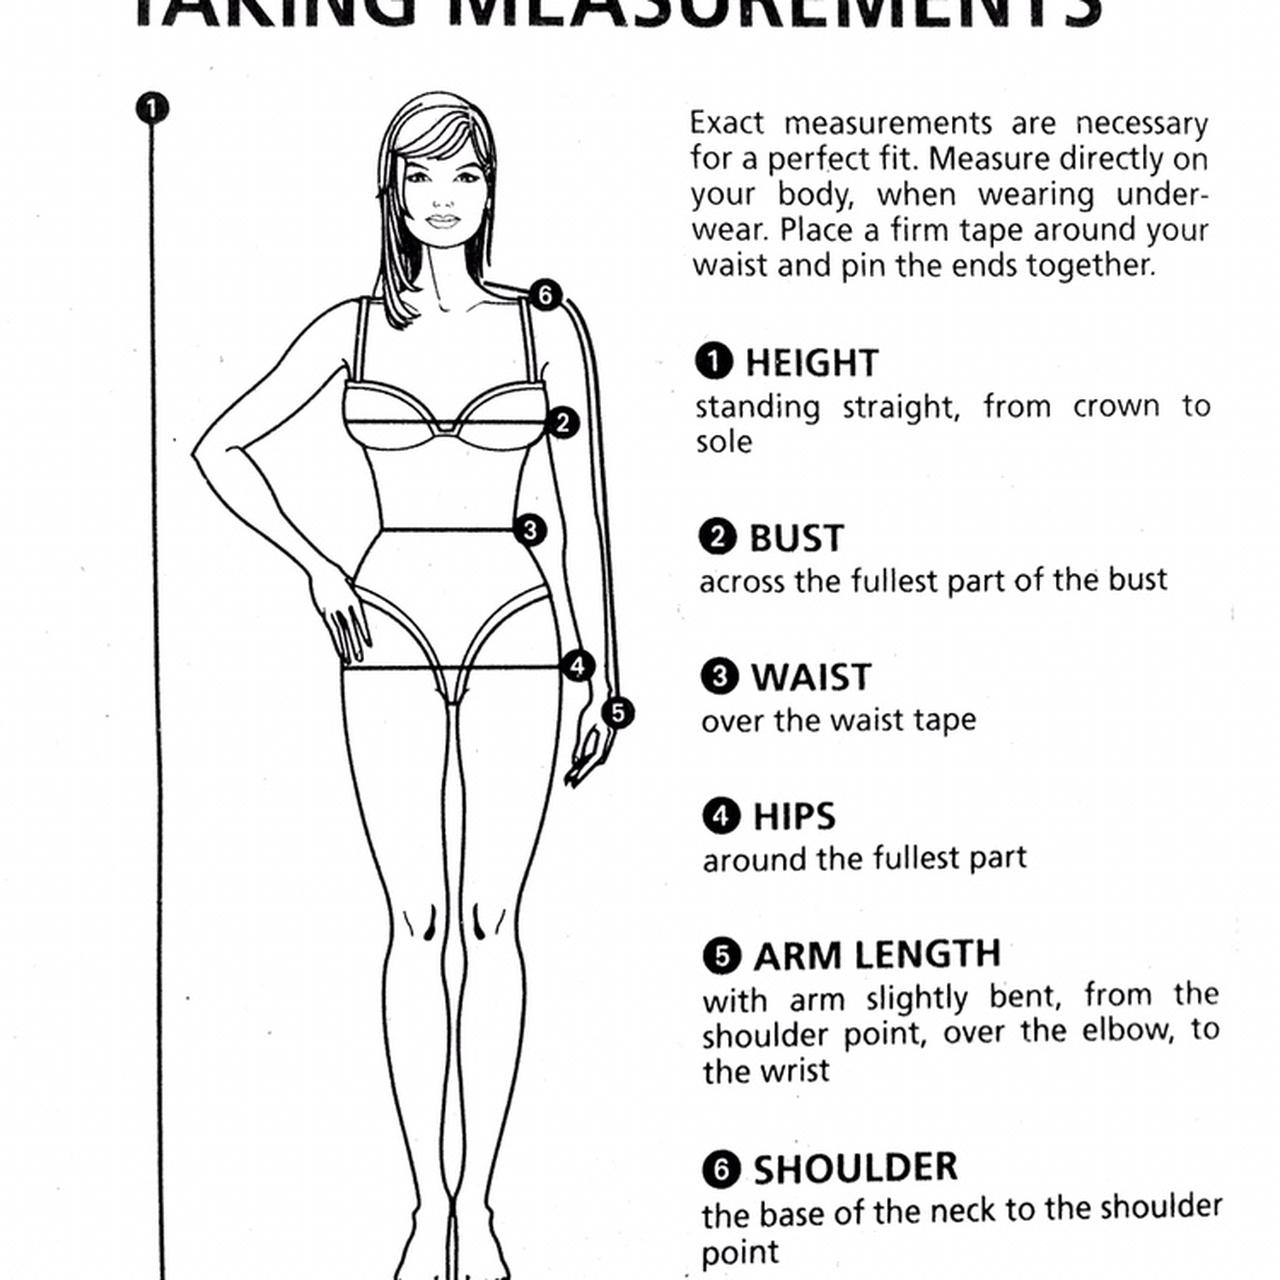 Know how to take measurements of your own body to